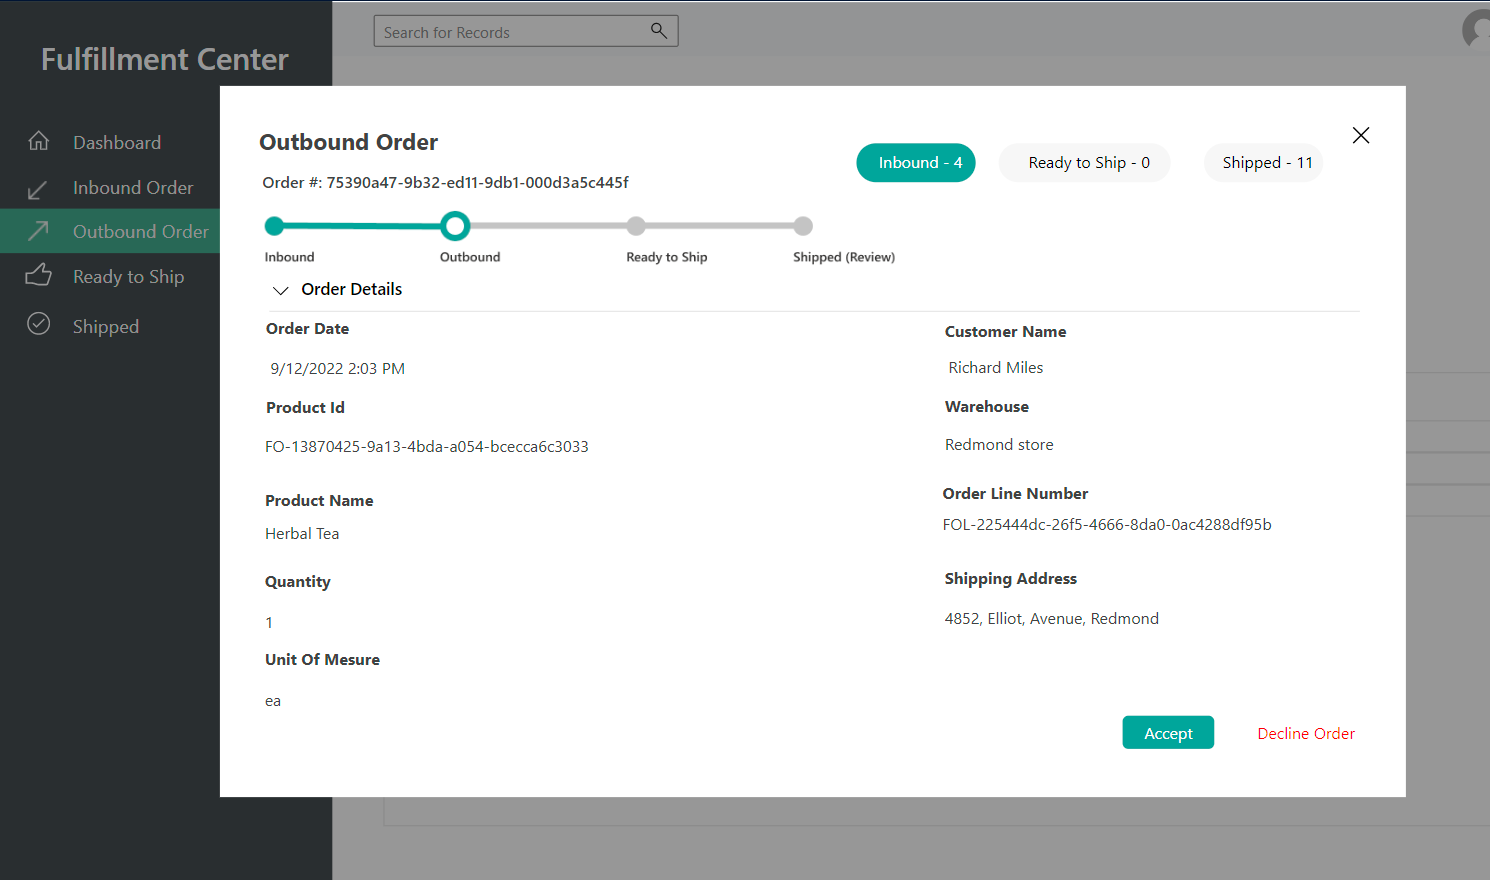 Outbound Order page in the demo fulfillment app.